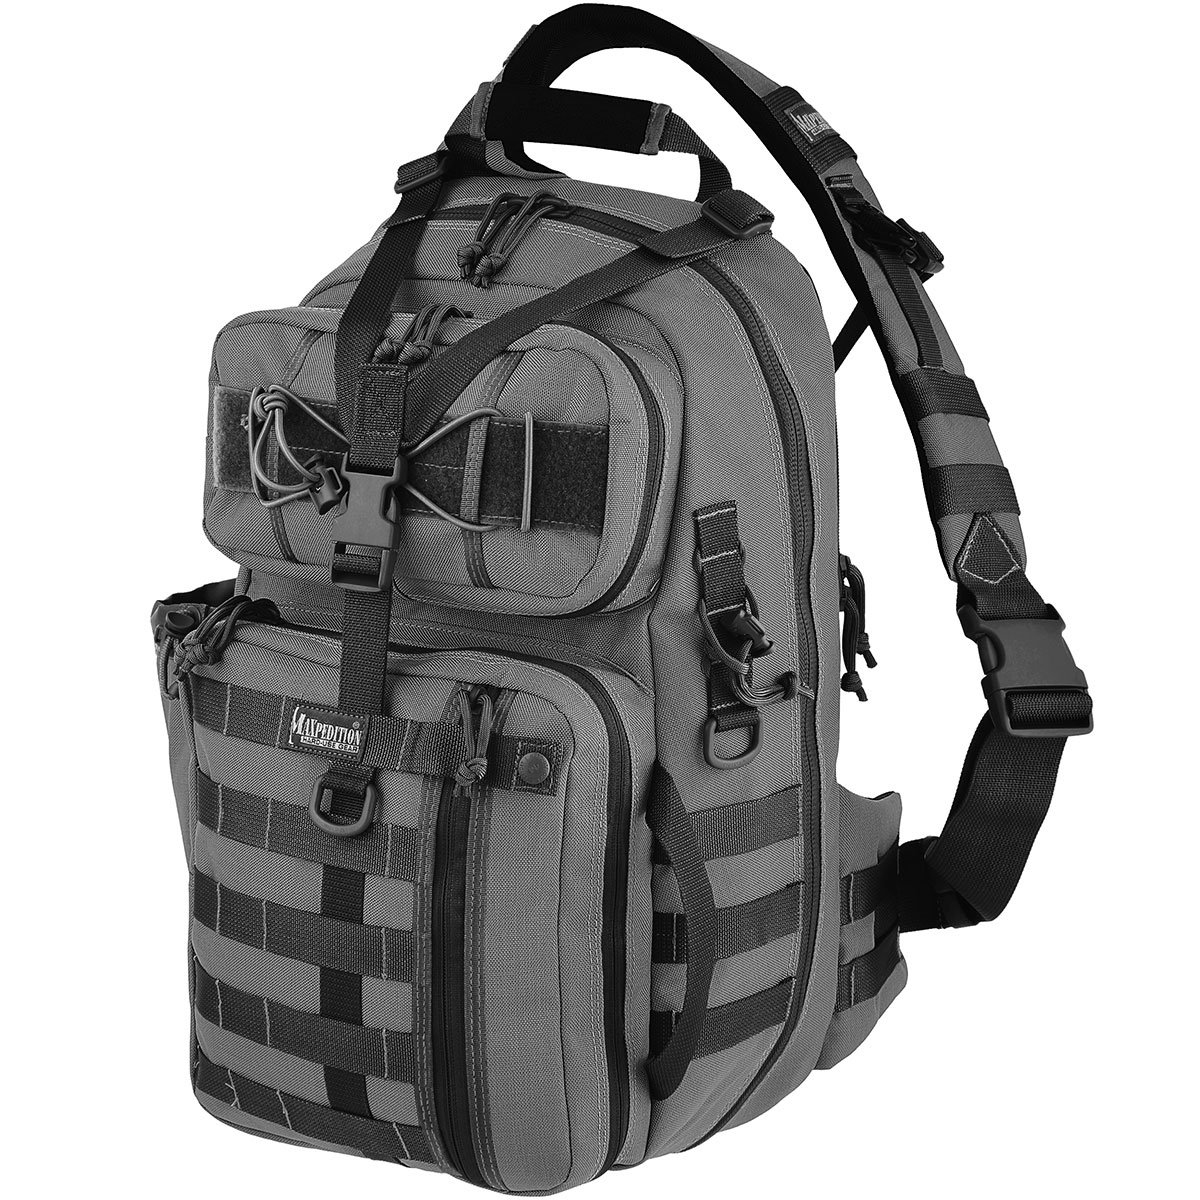 19 Best Military Backpacks to Carry Your Gear (2021) | Heavy.com